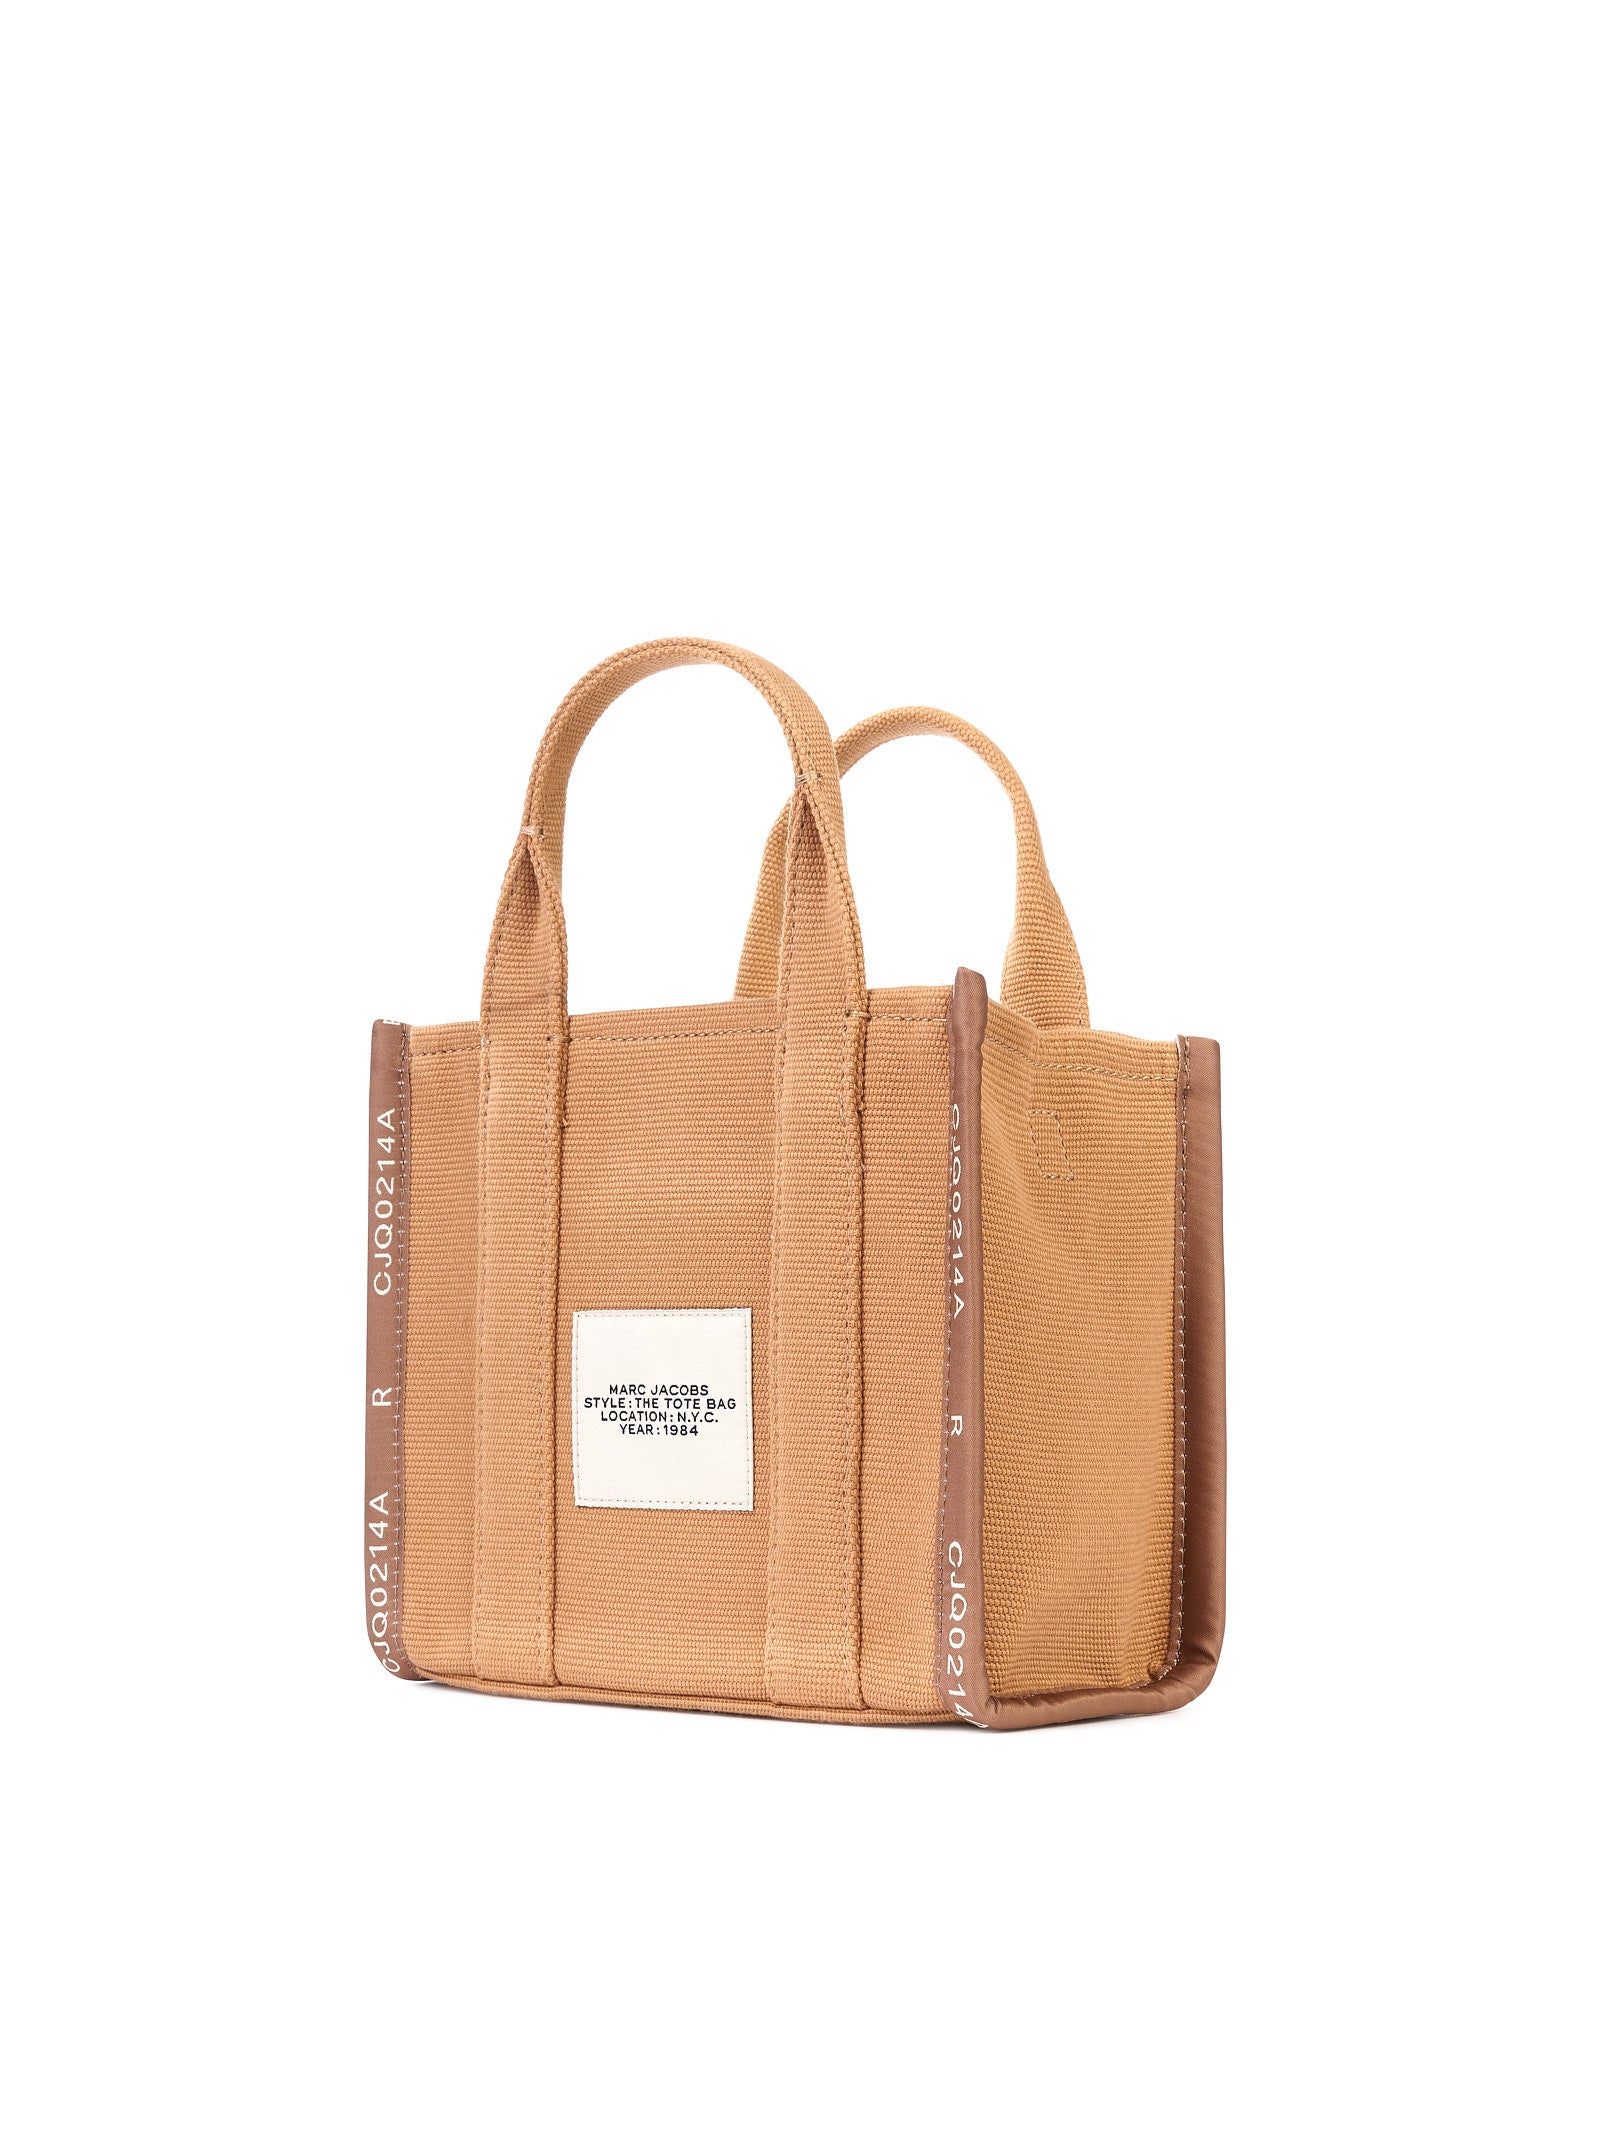 Borsa MARC JACOBS The small tote
Camel